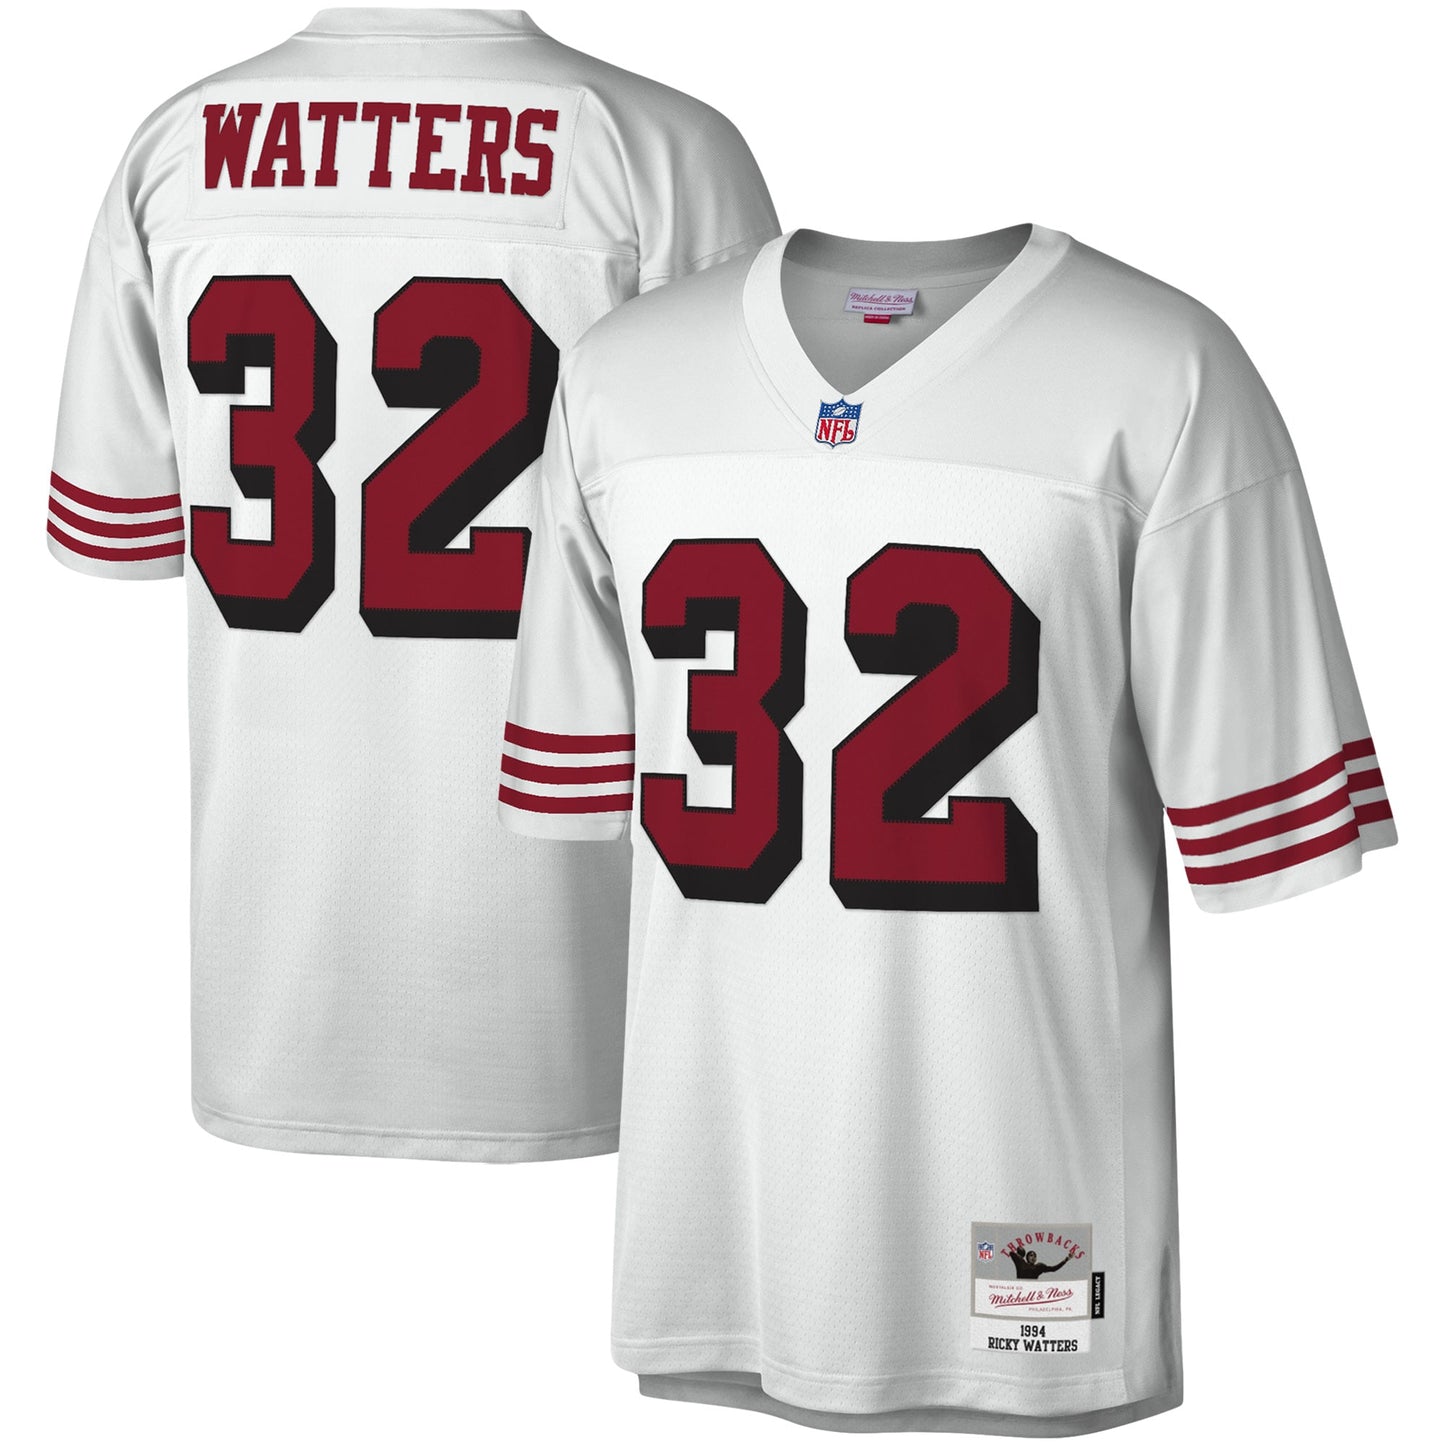 Ricky Watters San Francisco 49ers Mitchell & Ness Legacy Replica Jersey - White